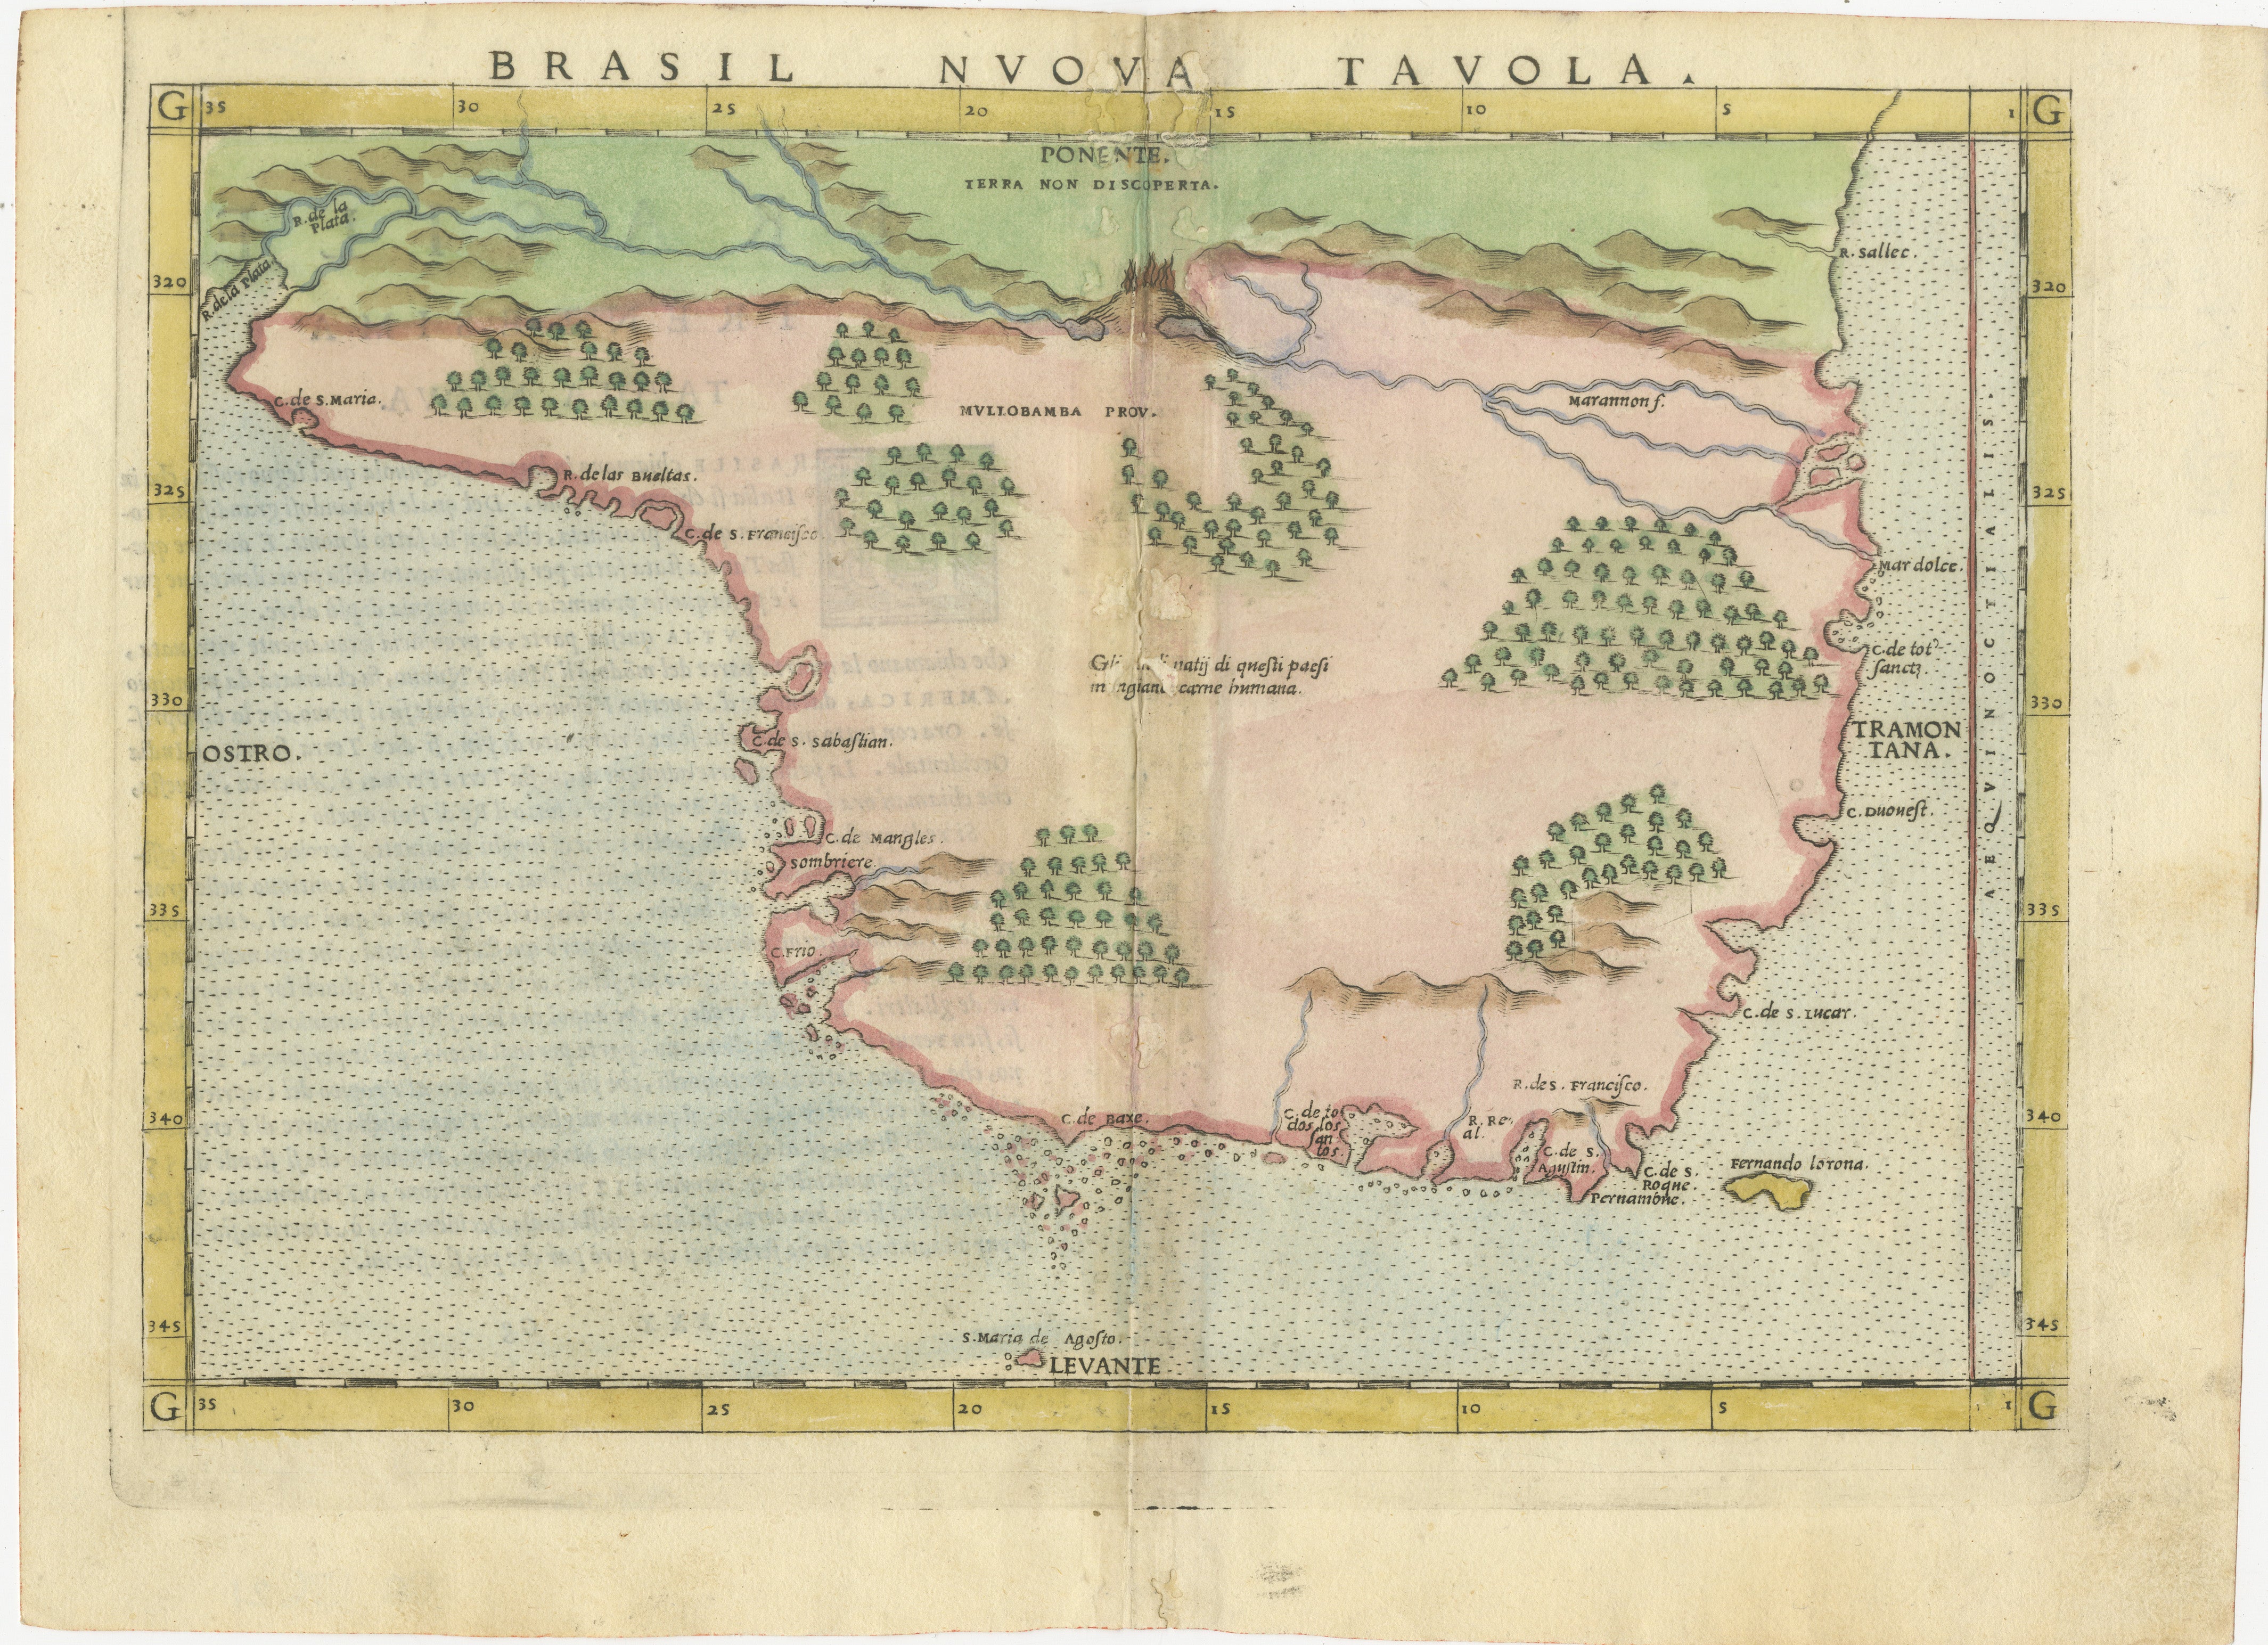 This important Ruscelli map of Brazil, from his work La Geografia di Claudio Tolomeo Alessandrino, is one of the earliest obtainable modern maps of the region. Despite the paucity of detail, this is a fascinating map.

Oriented west, the map reveals